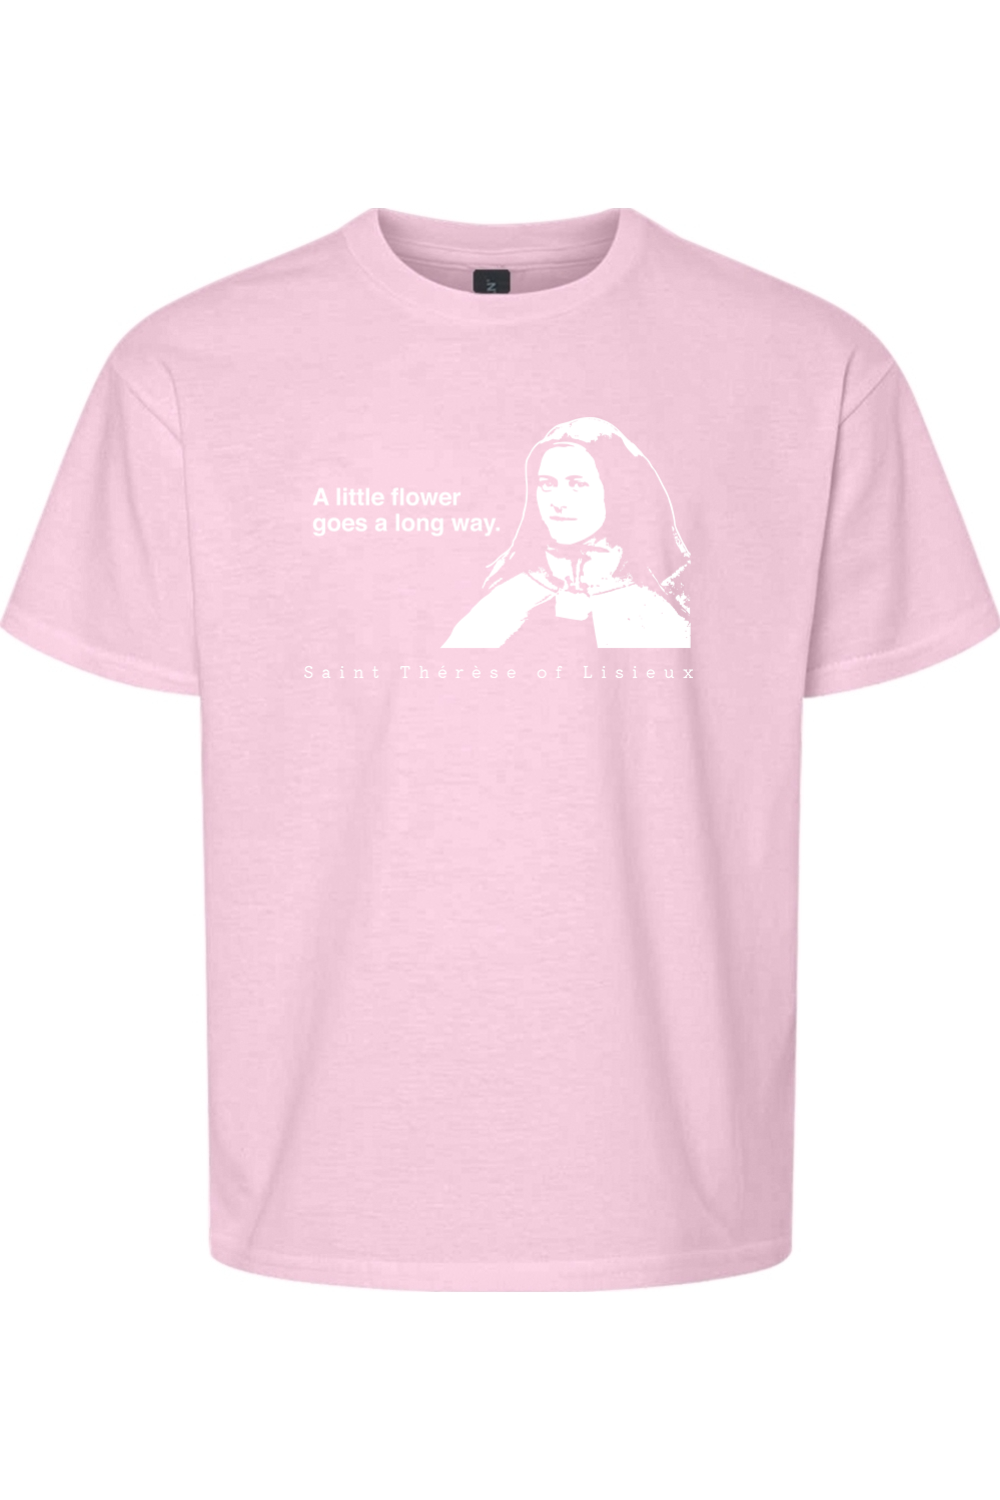 A Little Flower Goes a Long Way - St. Thérèse of Lisieux T-Shirt - youth